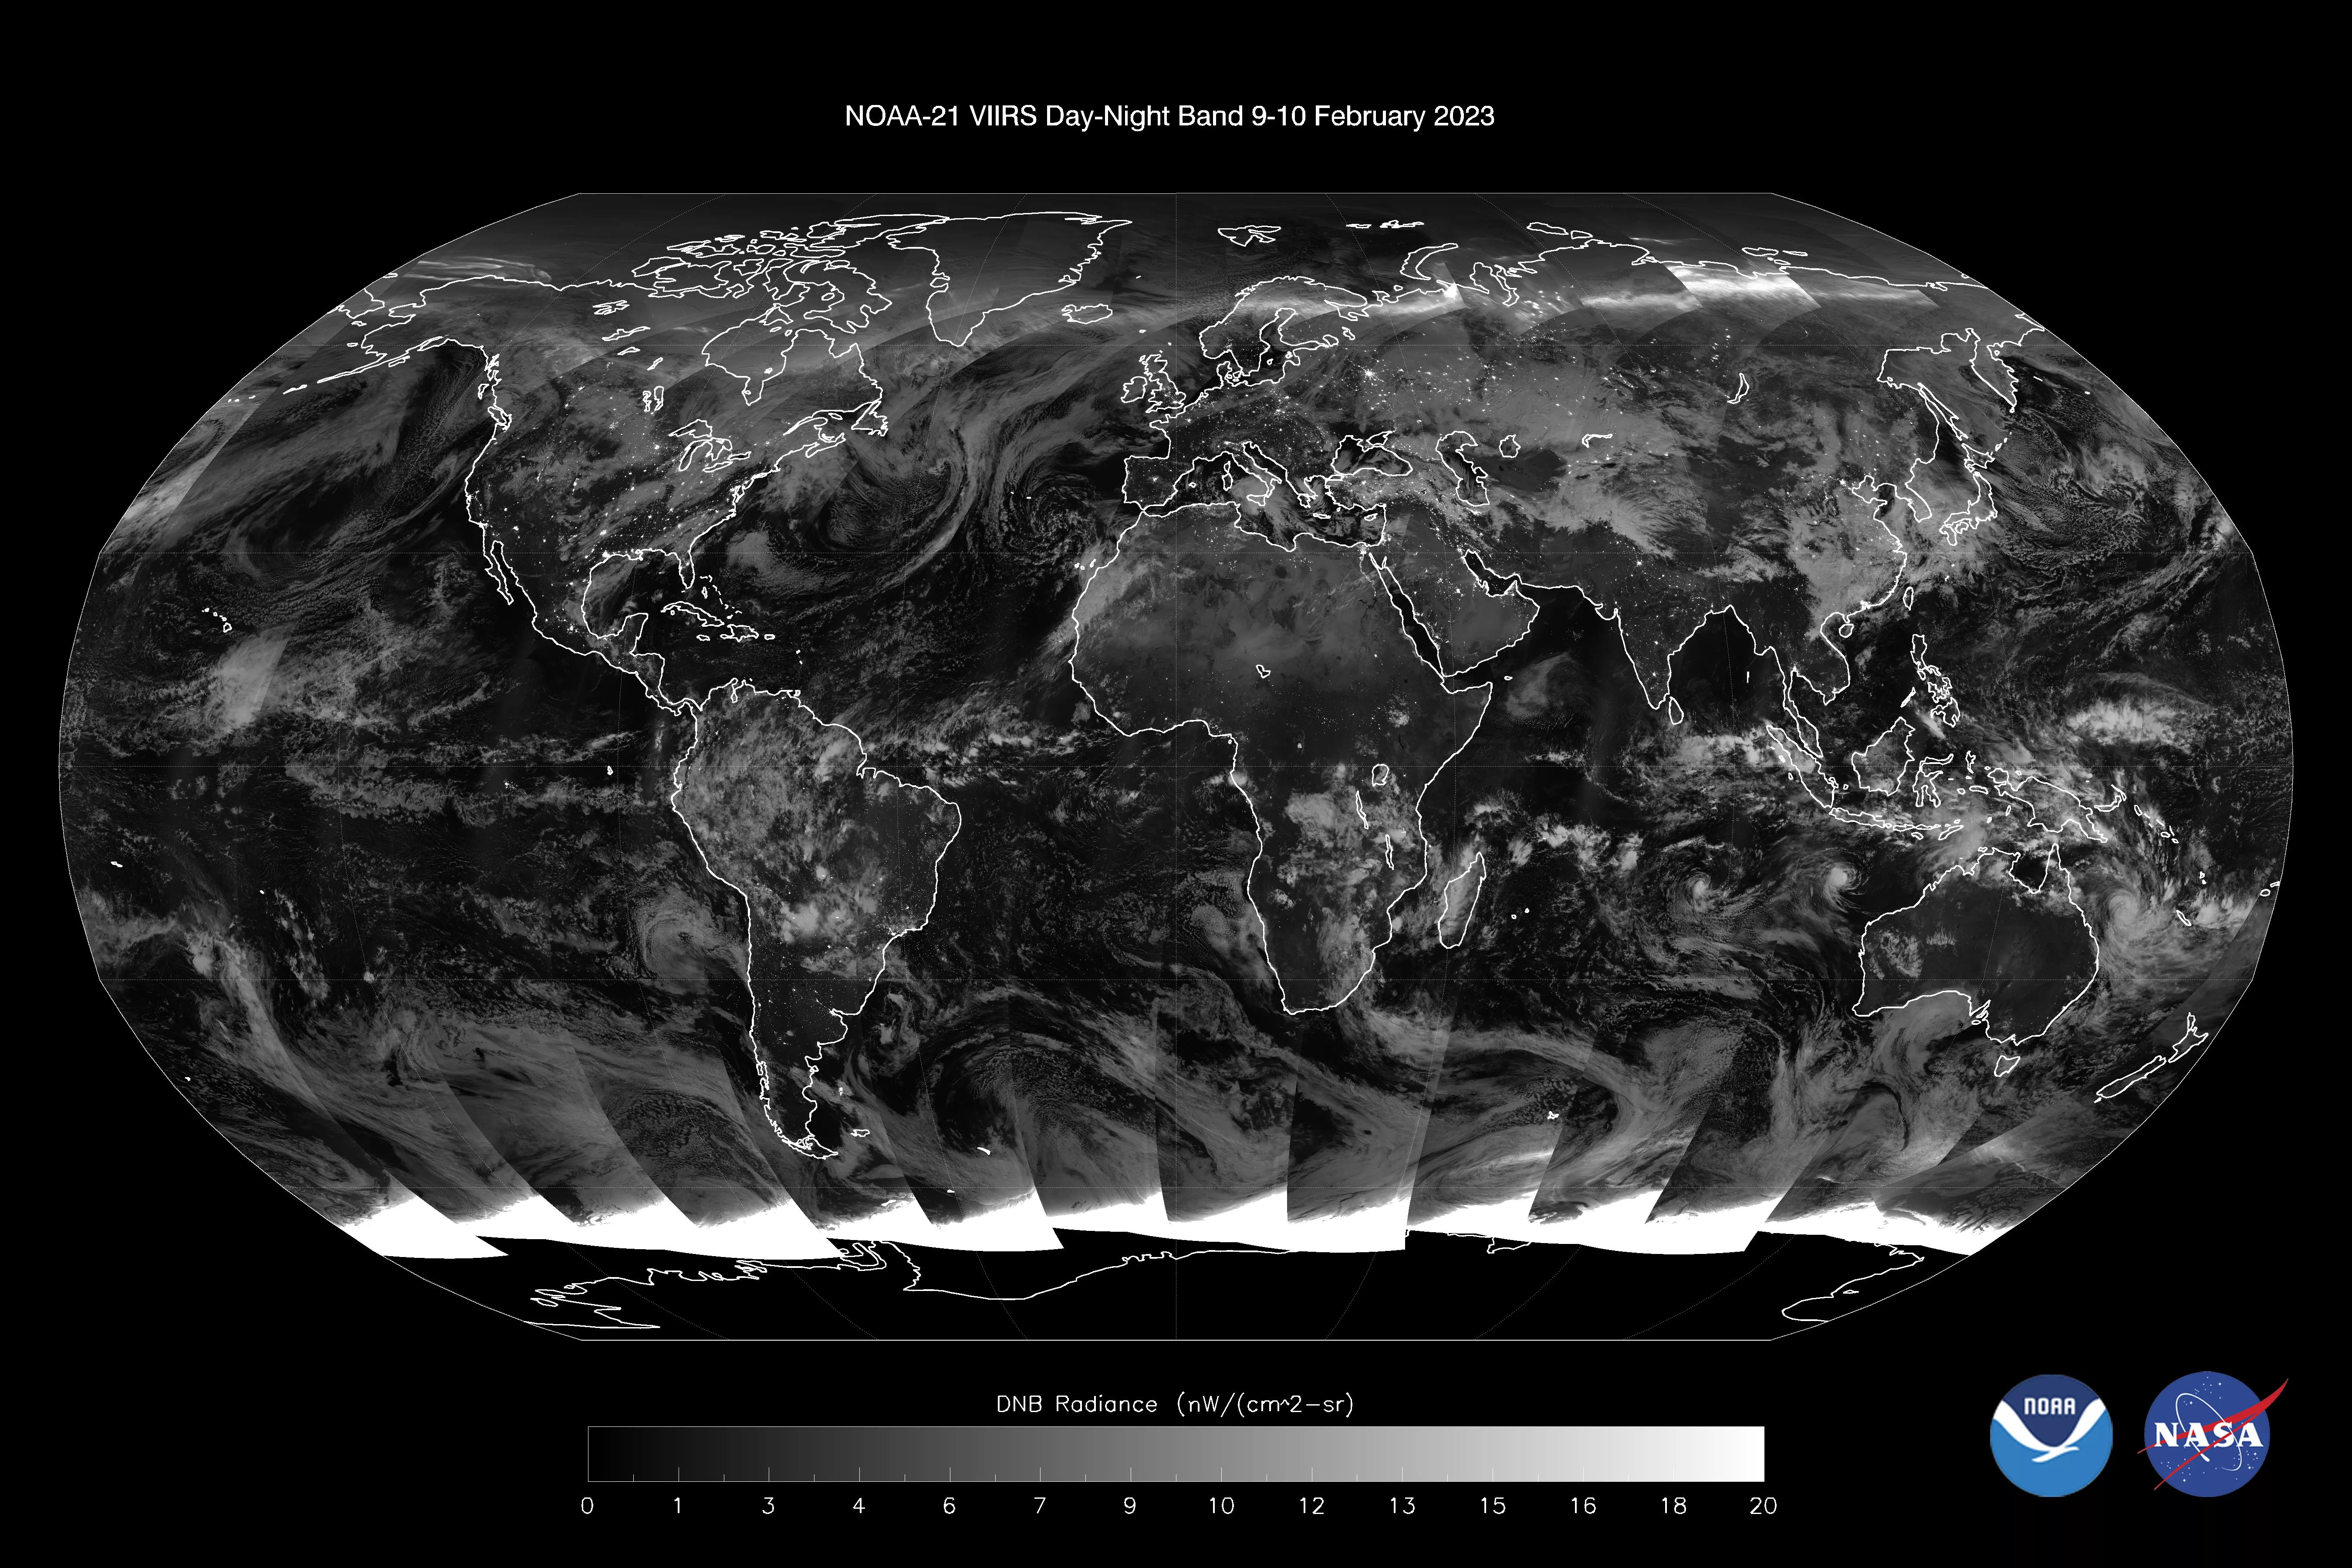 First light global image via the NOAA-21 VIIRS day night band